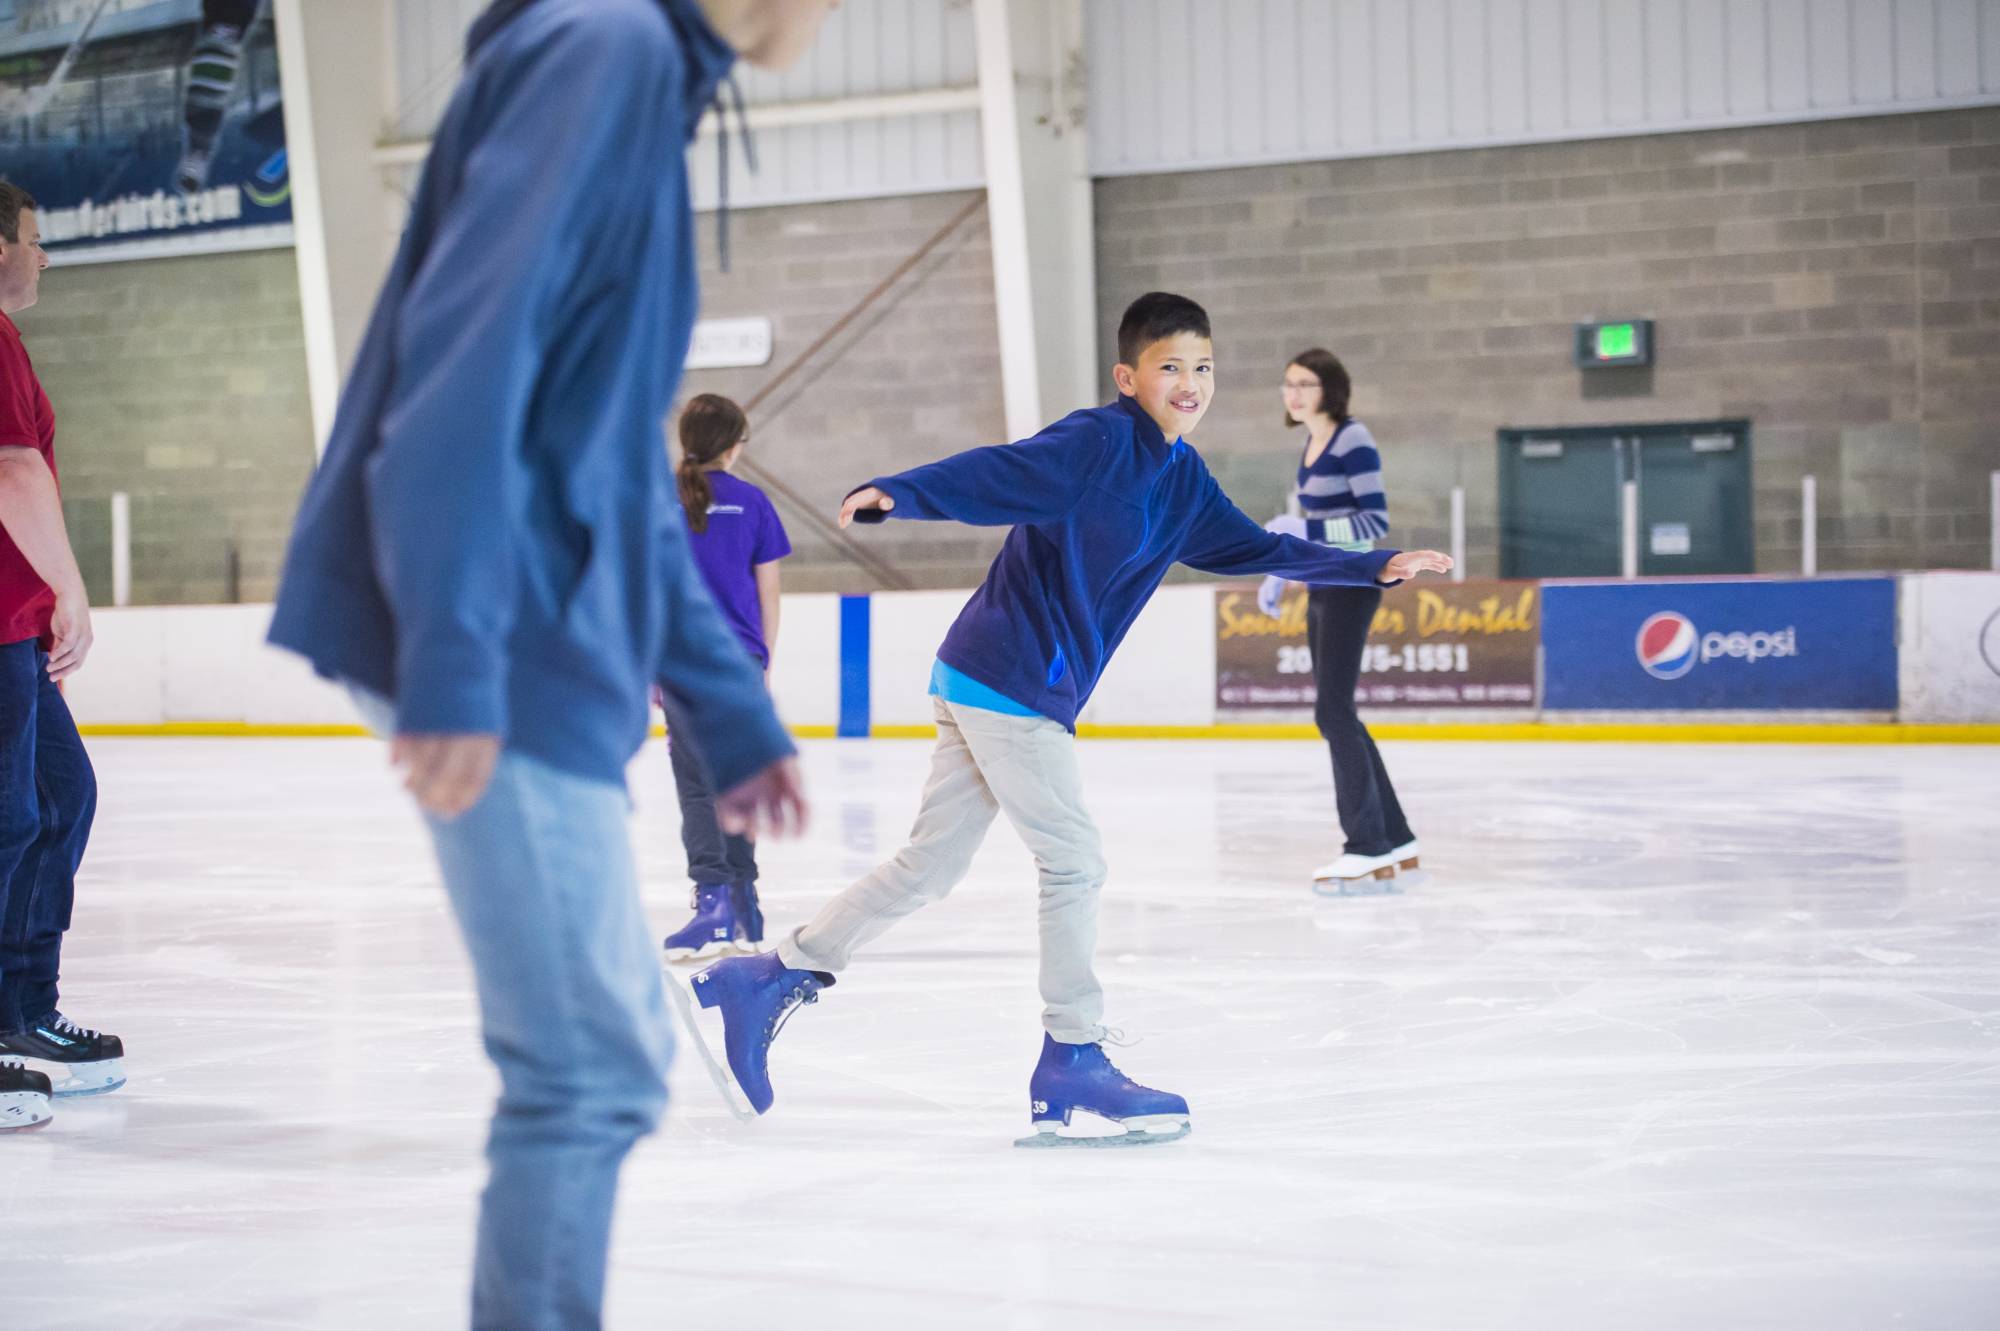 Ice skaters at Kent Valley Ice Centre in Kent, Washington